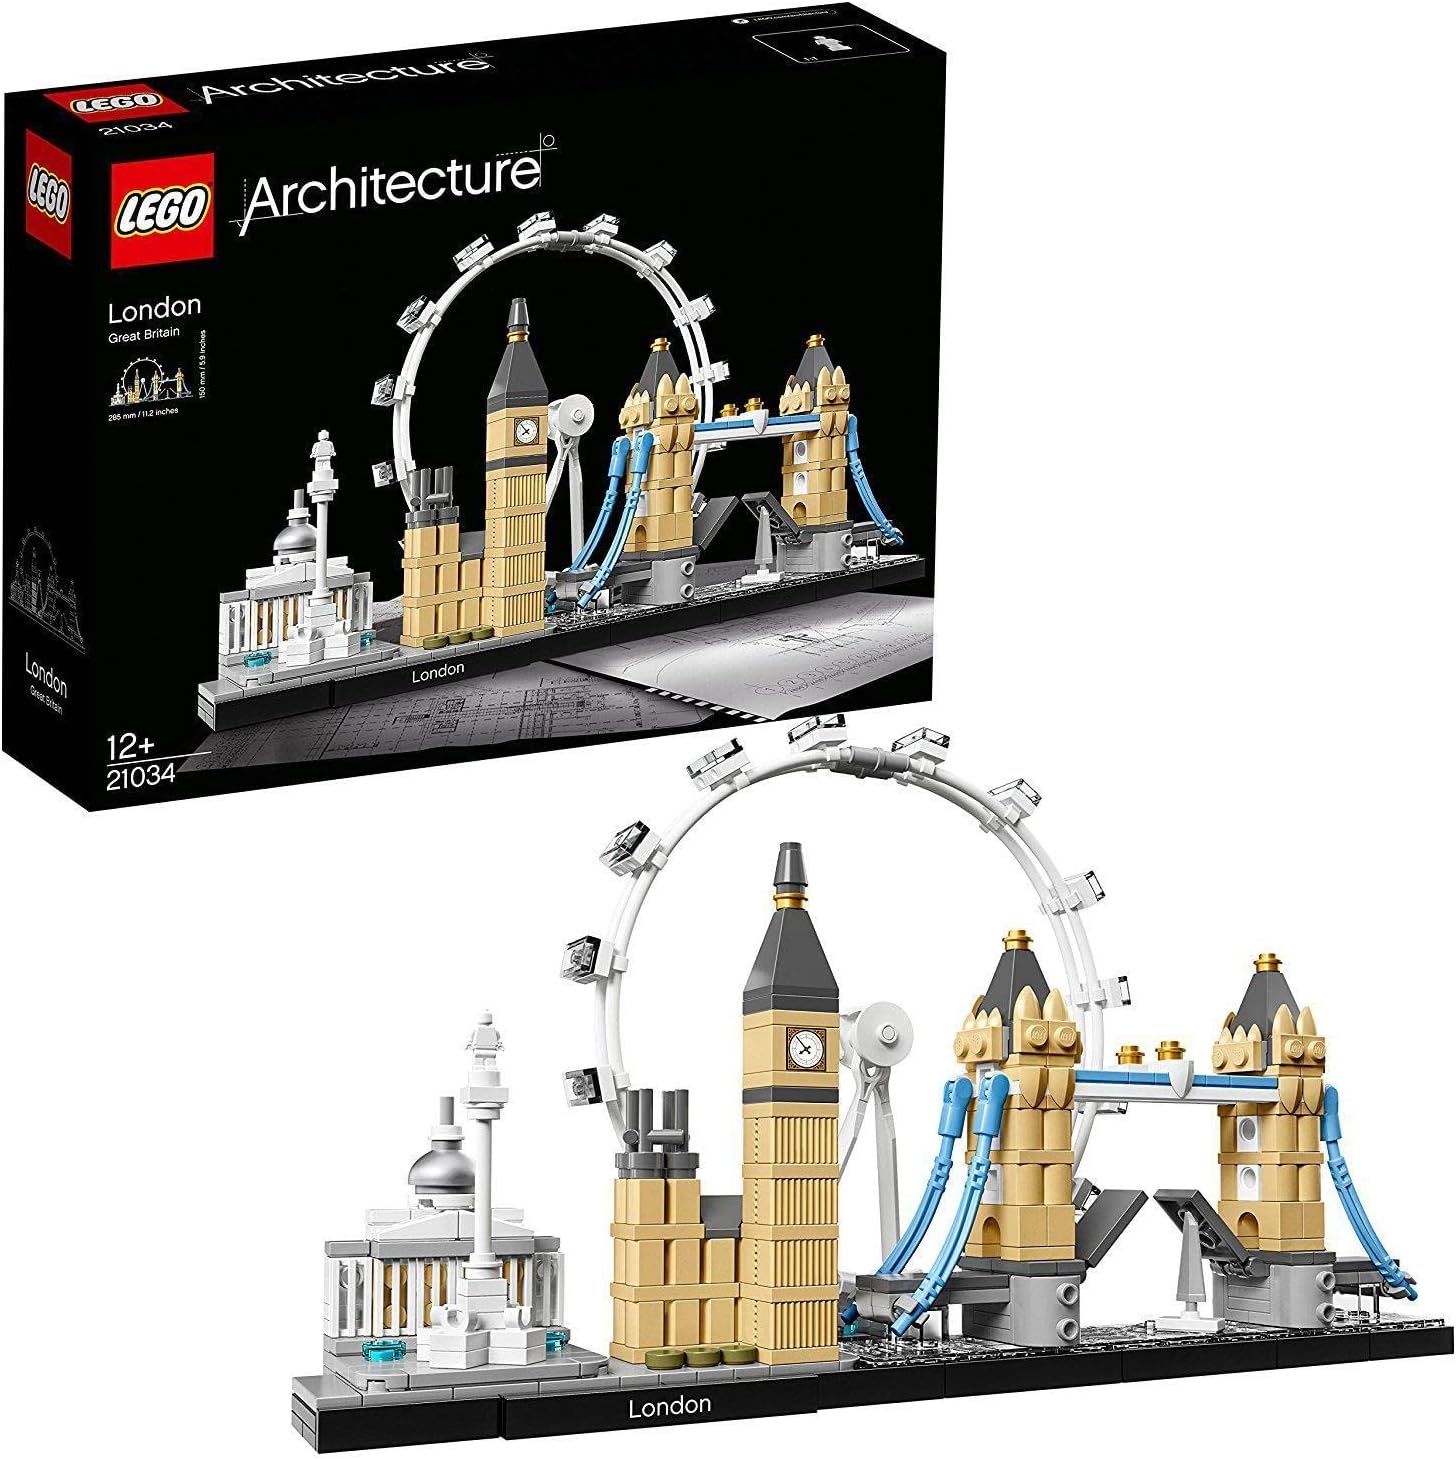 LEGO lovers will be a big fan of this themed set